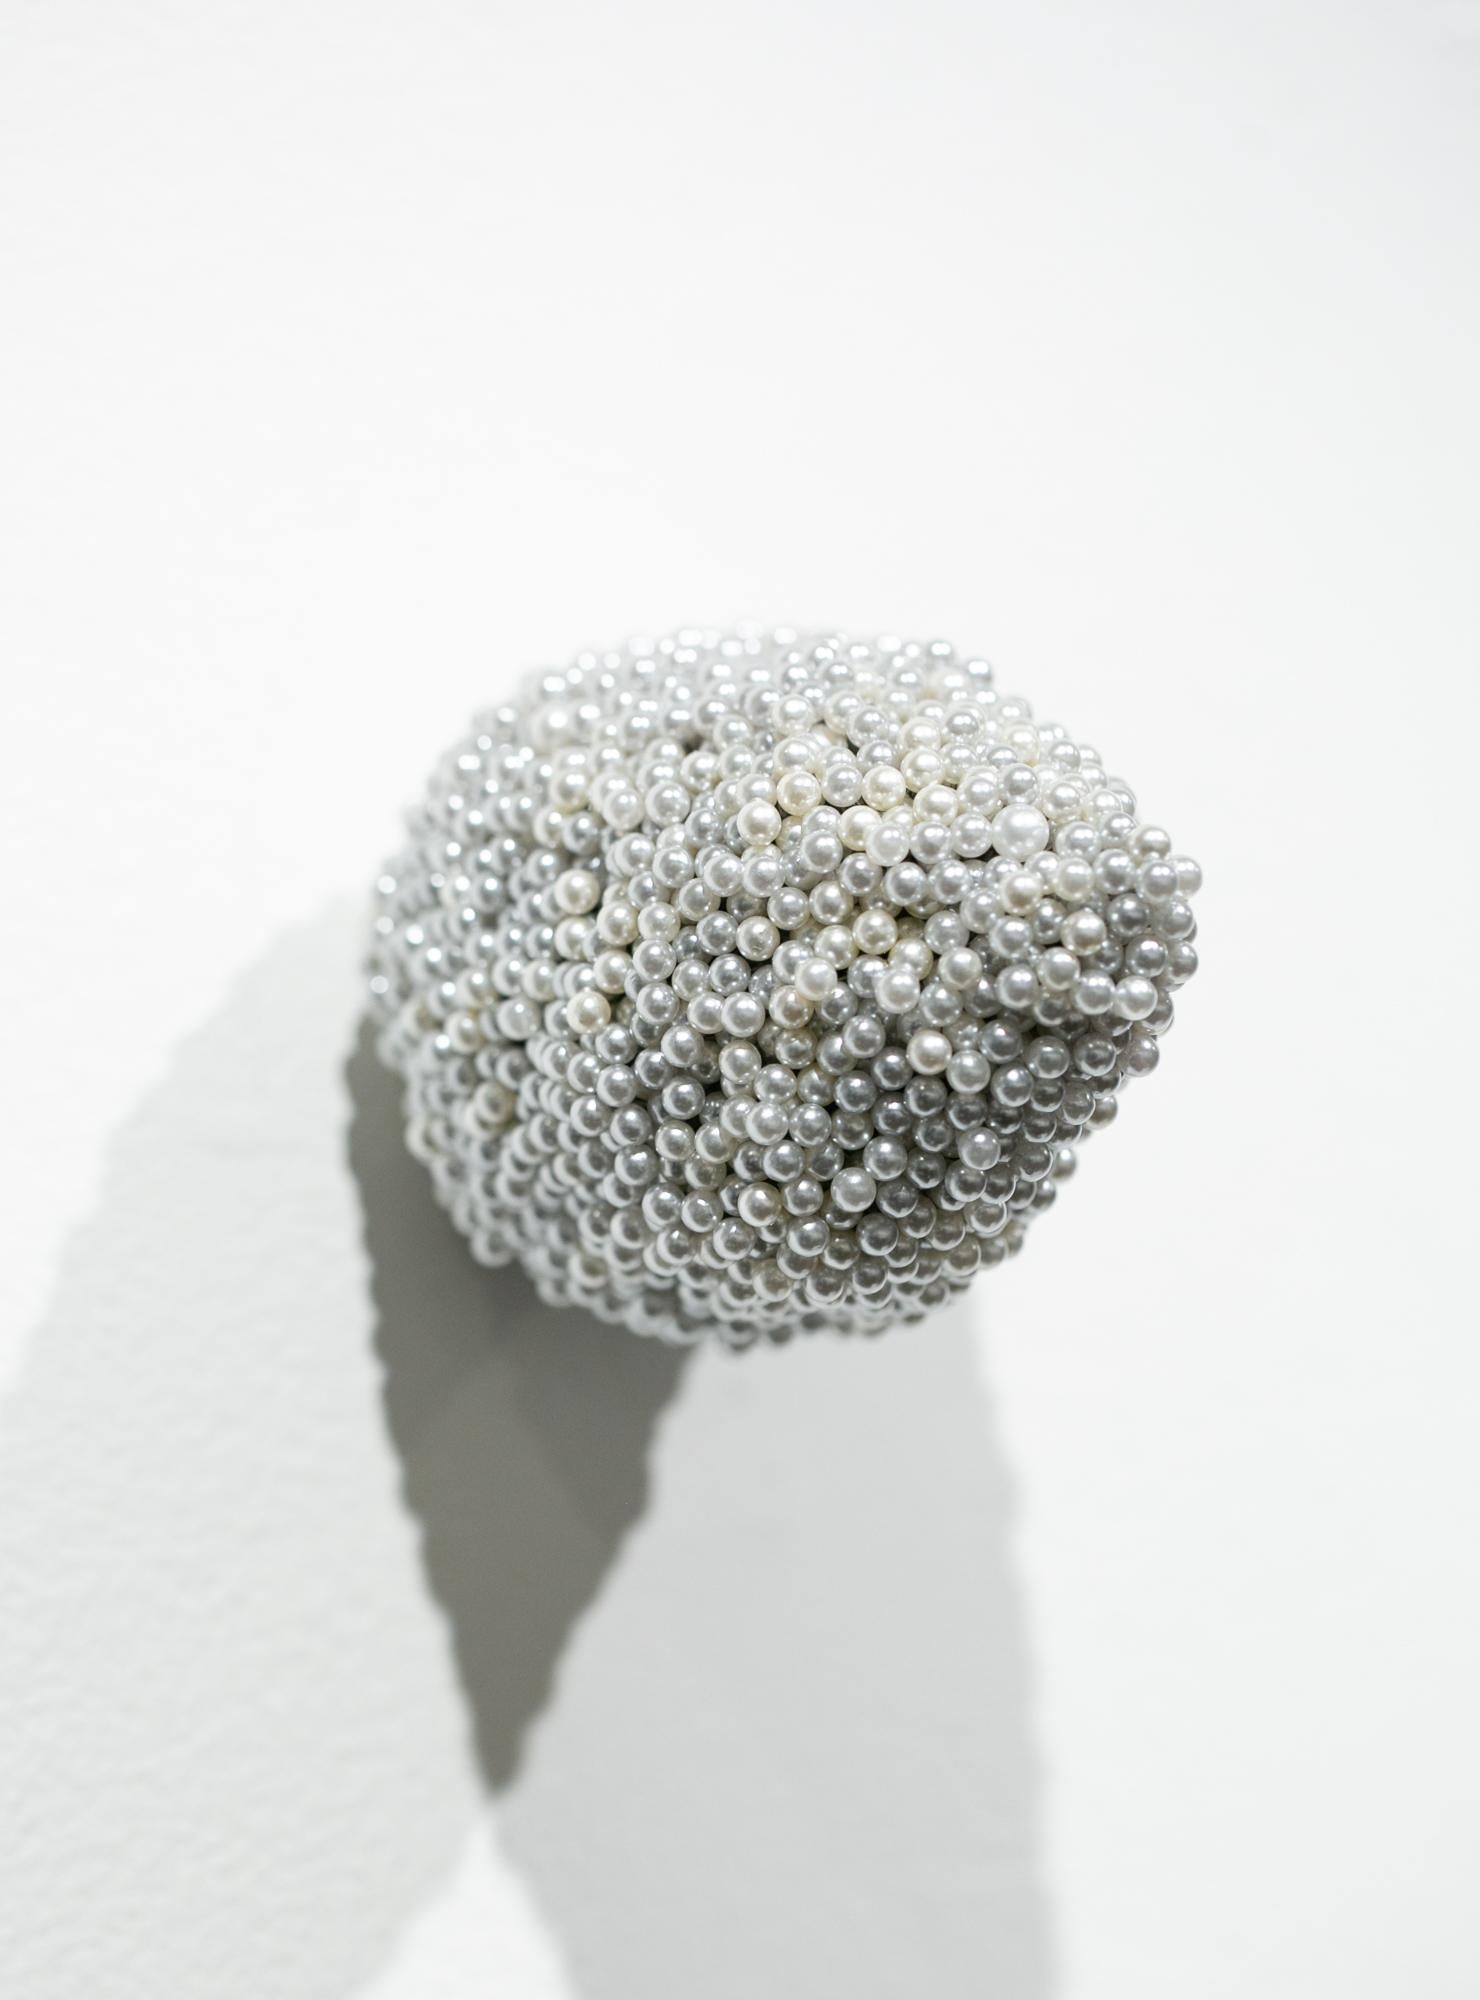 Angela Ellsworth Abstract Sculpture - "Tickler #8", White Abstract Pearl Corsage Pins Wall-Hanging Sculpture